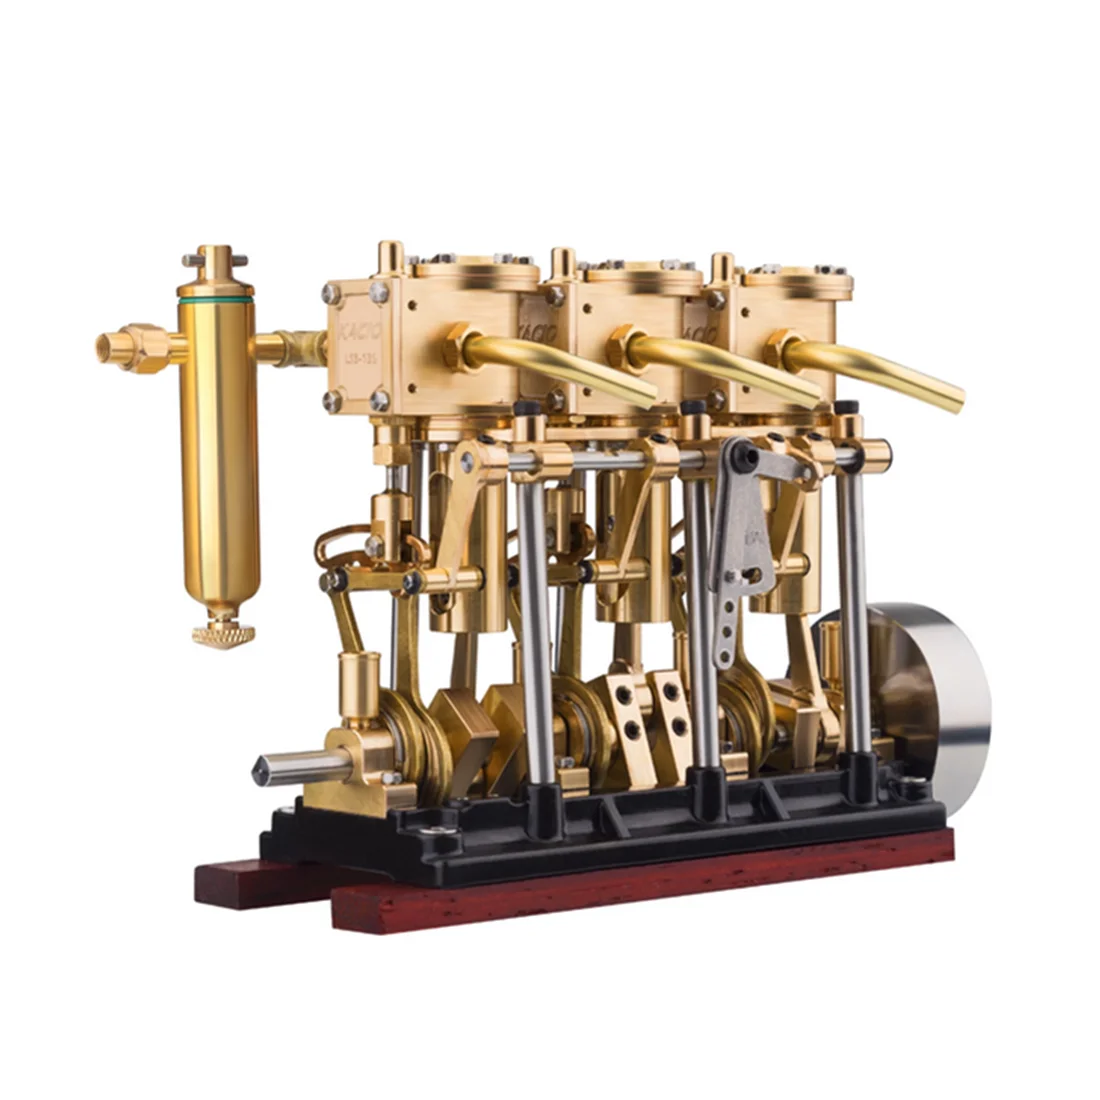 

KACIO LS3-13S Vertical Three-cylinder / 2 cylinder Reciprocating Steam Engine Model with Oil Cup for 80-120CM Steam Model Ship